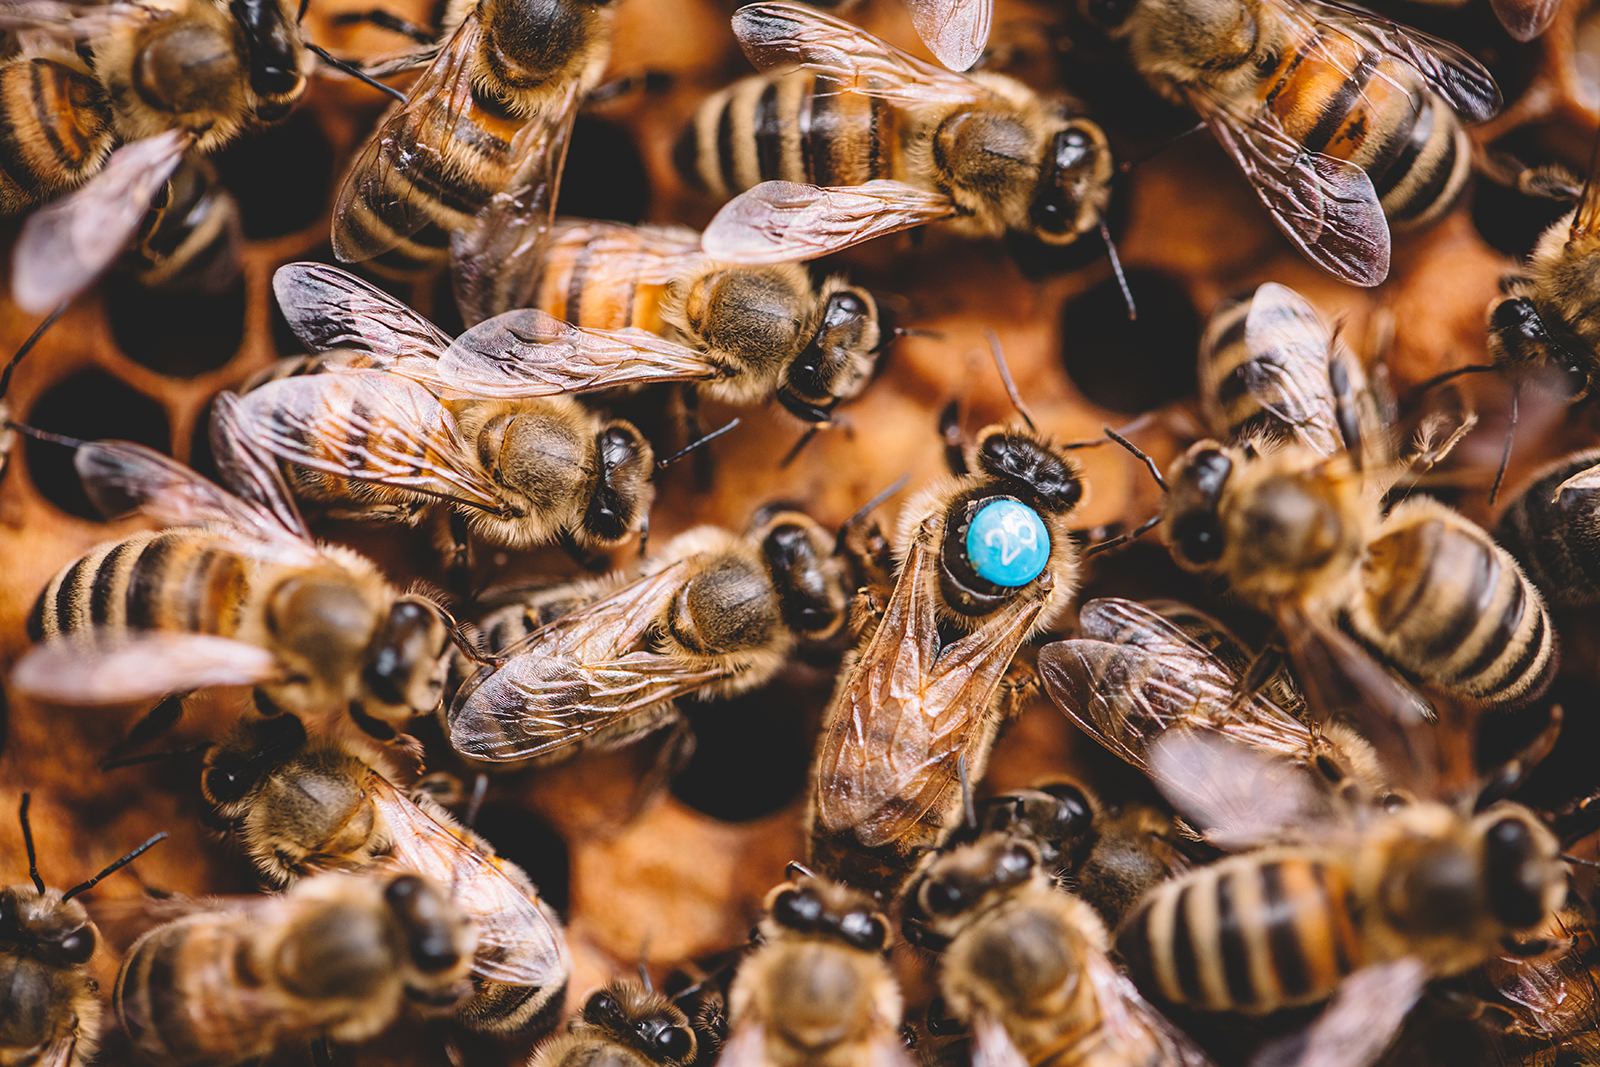 Why do bees reject a queen?